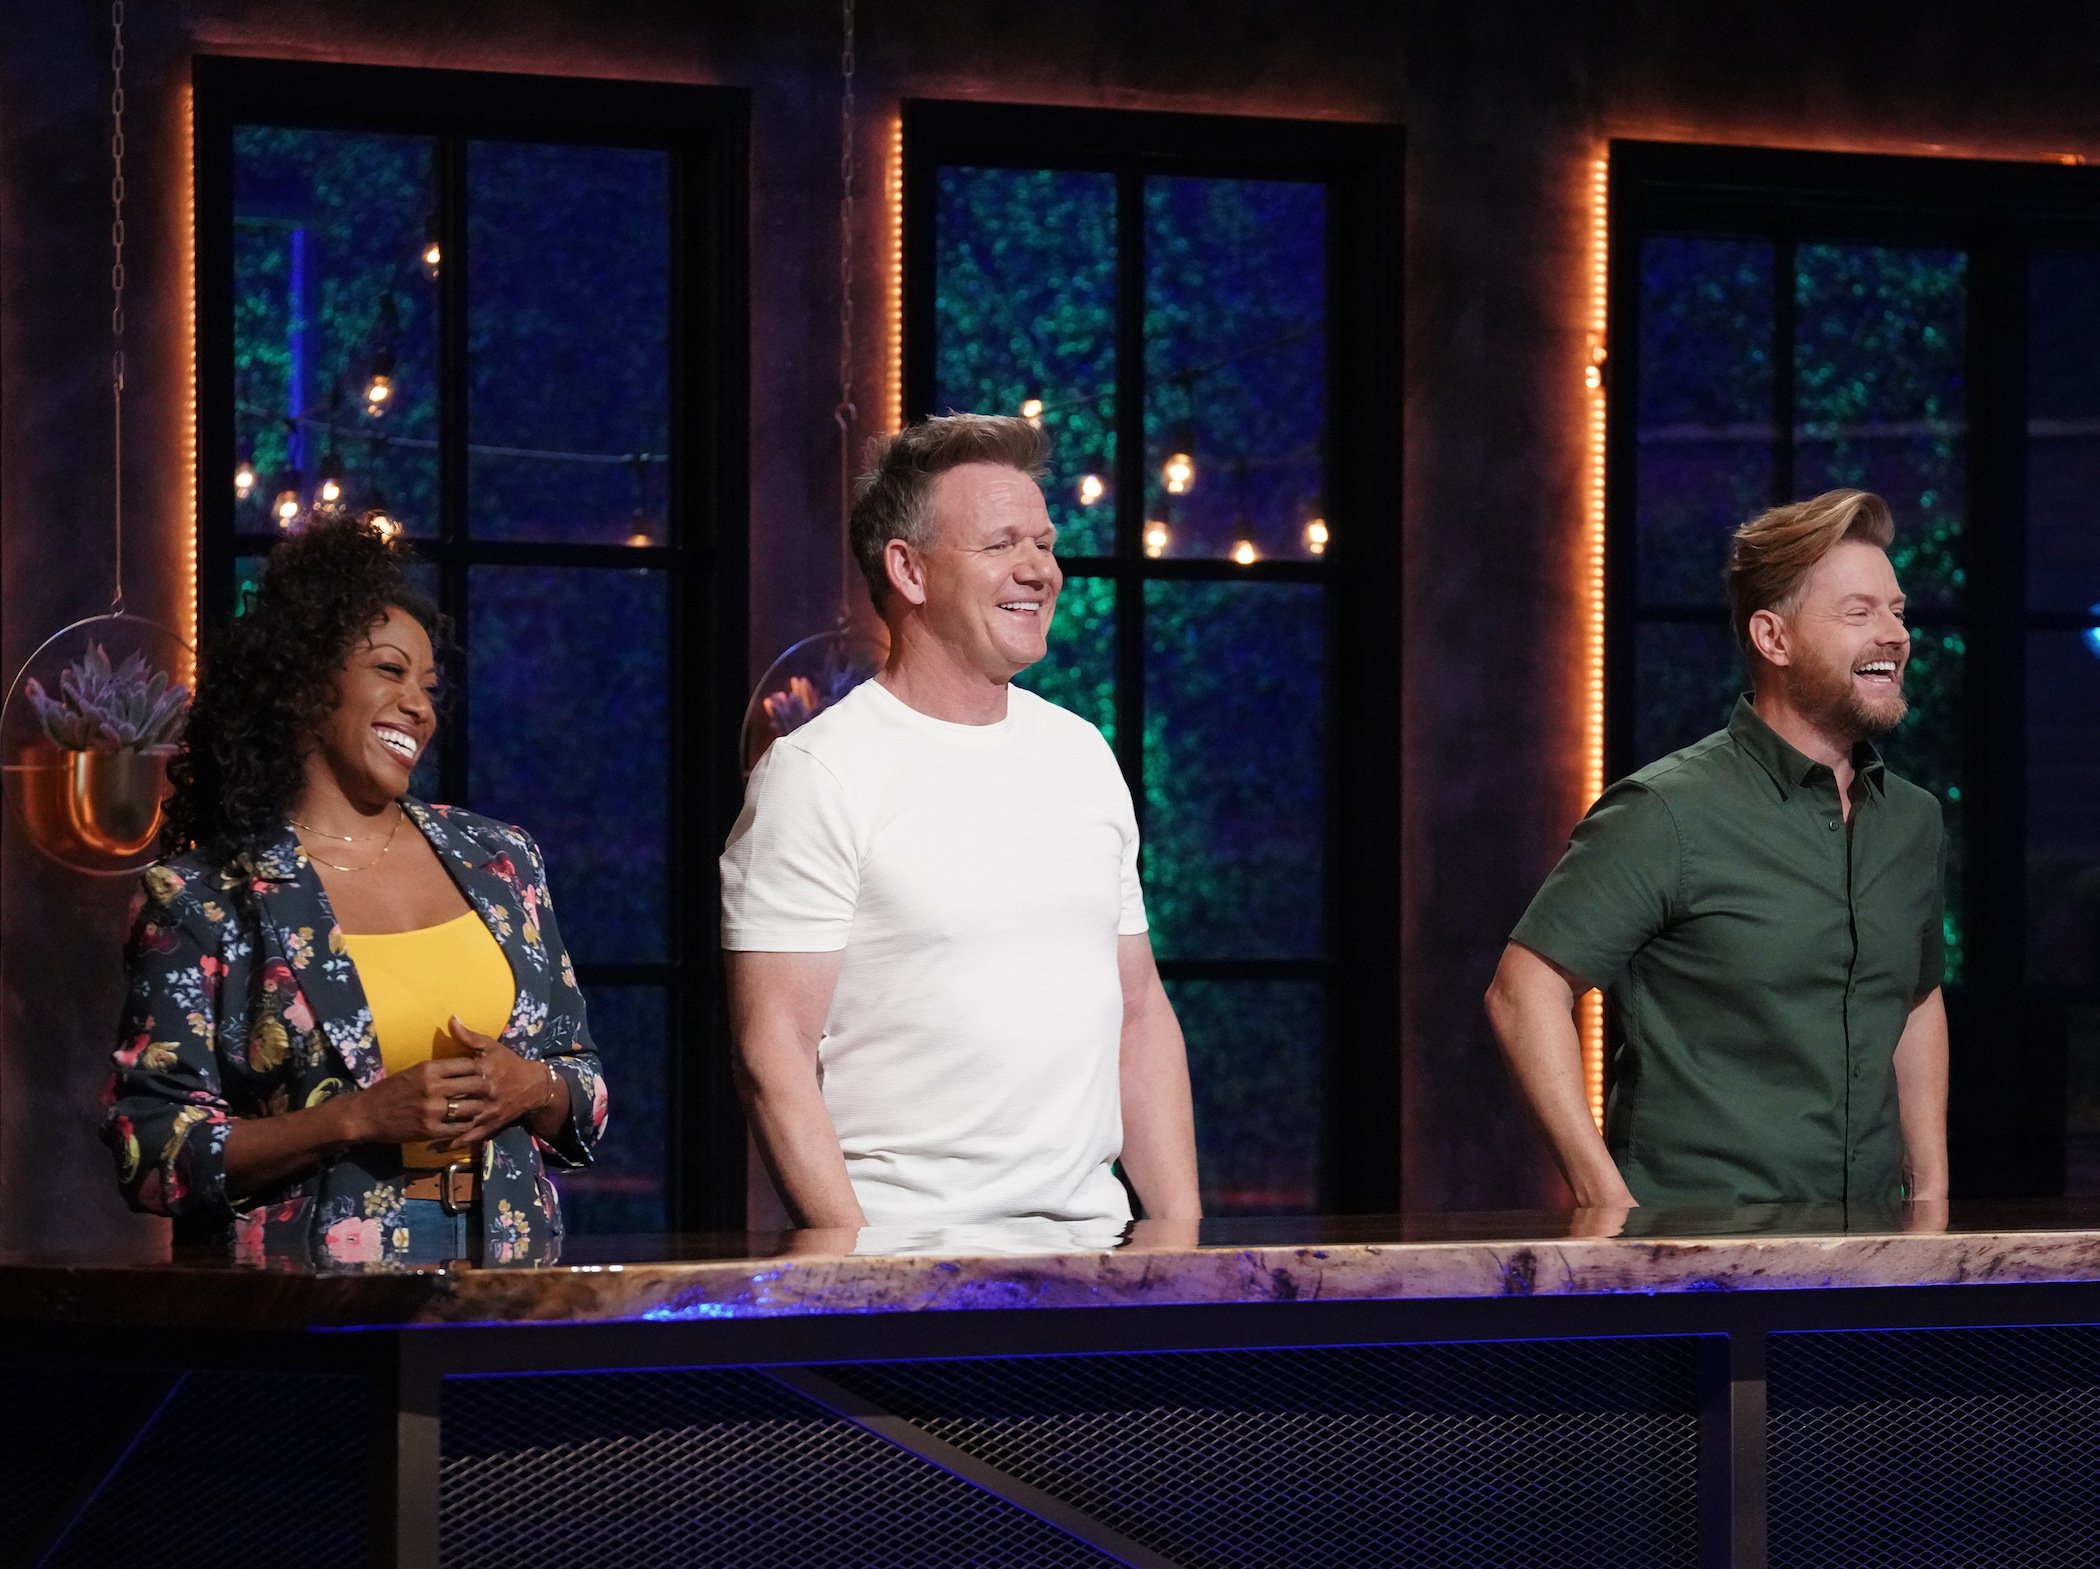 Nyesha Arrington, Gordon Ramsay, and Richard Blaise standing next to each other and laughing in 'Next Level Chef'